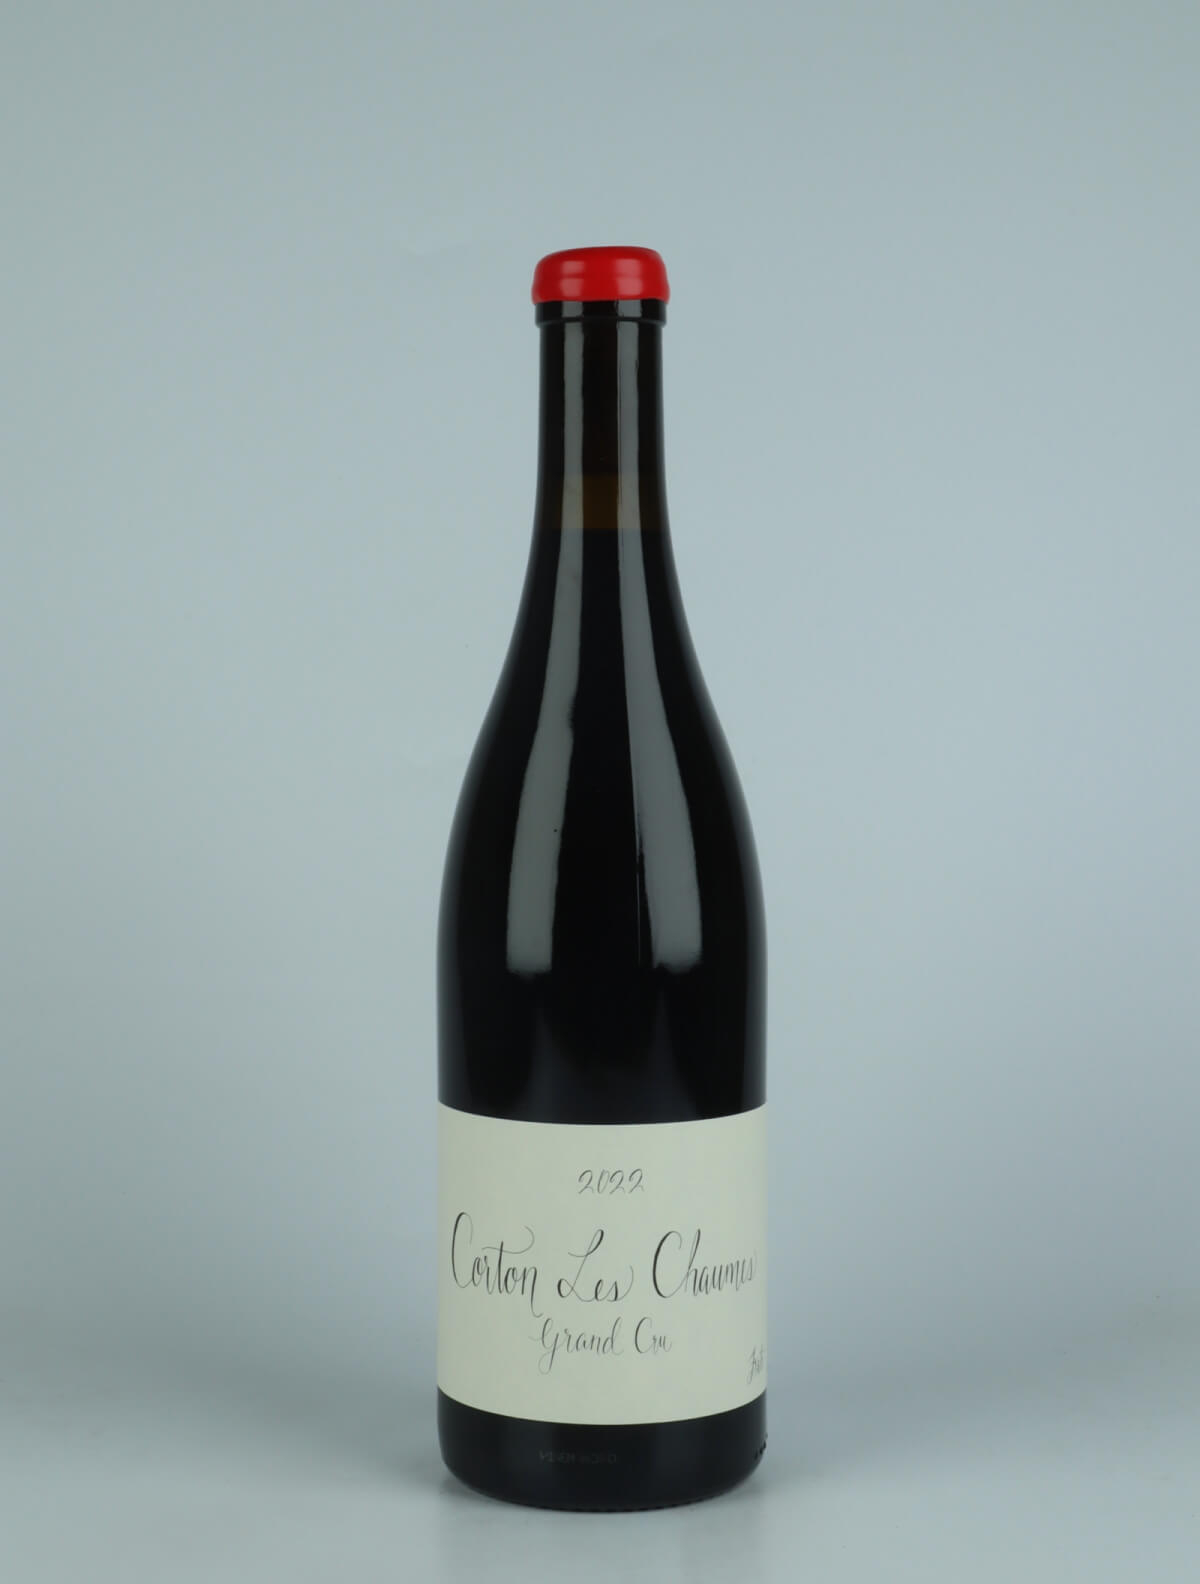 A bottle 2022 Corton Les Chaumes - Grand Cru Red wine from Fraté, Burgundy in France